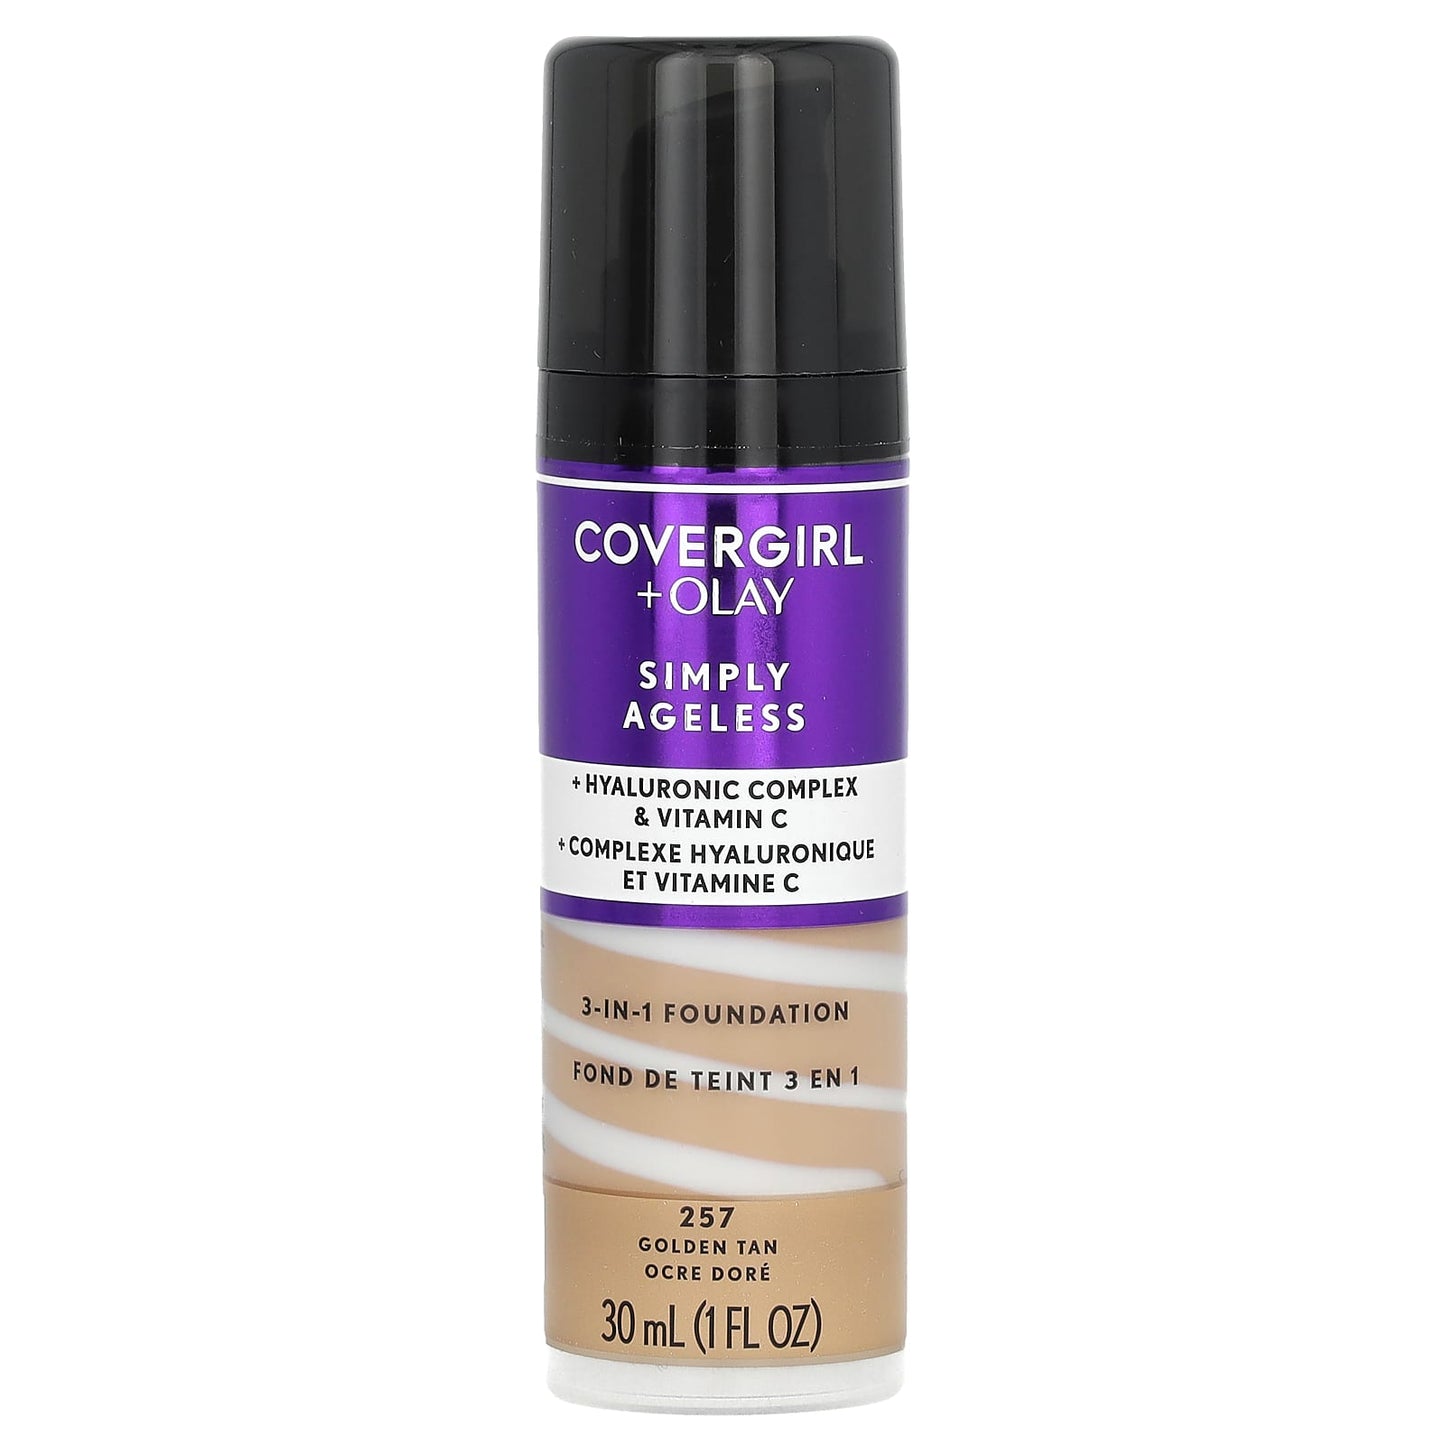 Covergirl-Olay Simply Ageless-3-in-1 Foundation-257 Golden Tan-1 fl oz (30 ml)